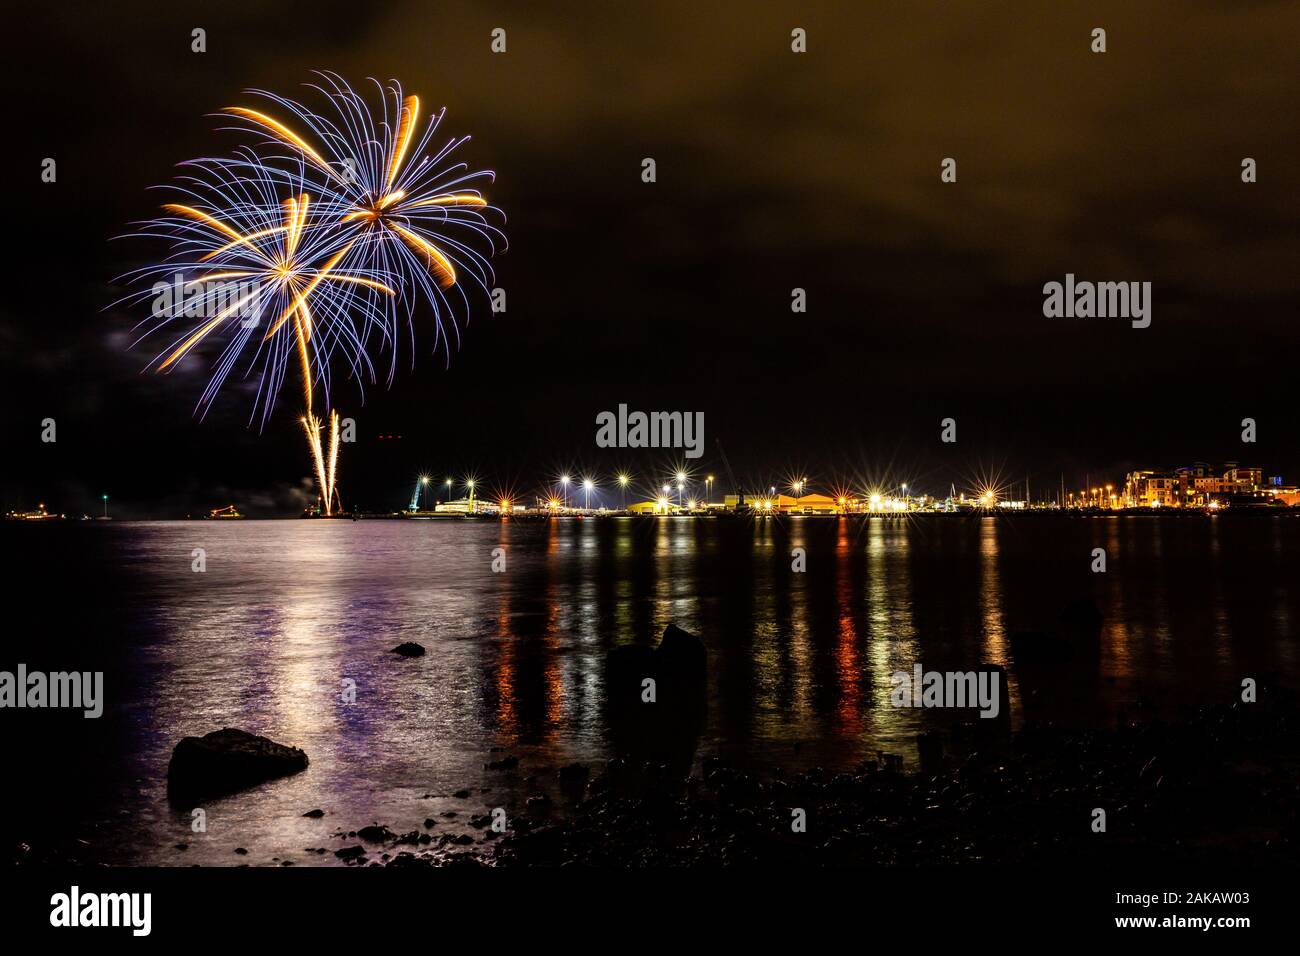 Colour night time photograph of public fireworks display, celebrating Guy Fawkes night on Poole quay, Dorset, England. Stock Photo